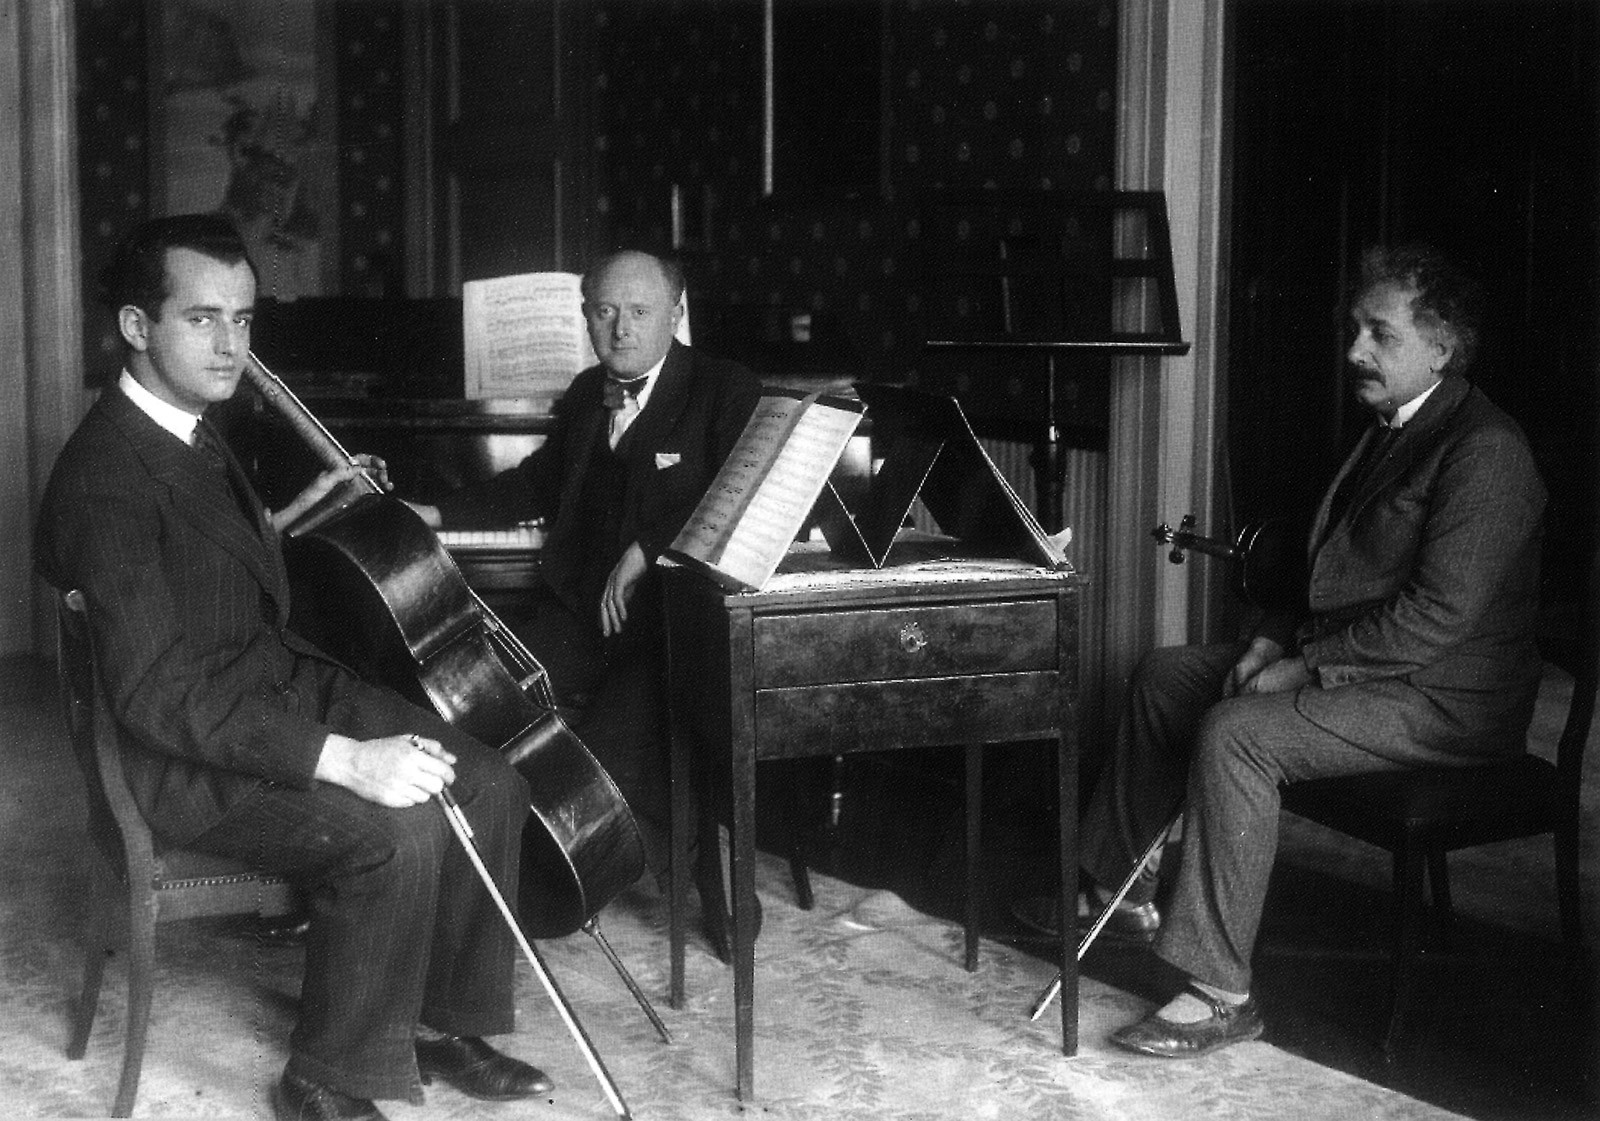 While Francesco von Mendelssohn was trying to make his mark as a professional cellist, Albert Einstein was known to be a dilettante – albeit of debatable talent – on the violin.  They are shown here playing together in the physicist’s flat in Berlin © bpk / Bayrische Staatsbibliothek / Archiv Heinrich Hoffmann.